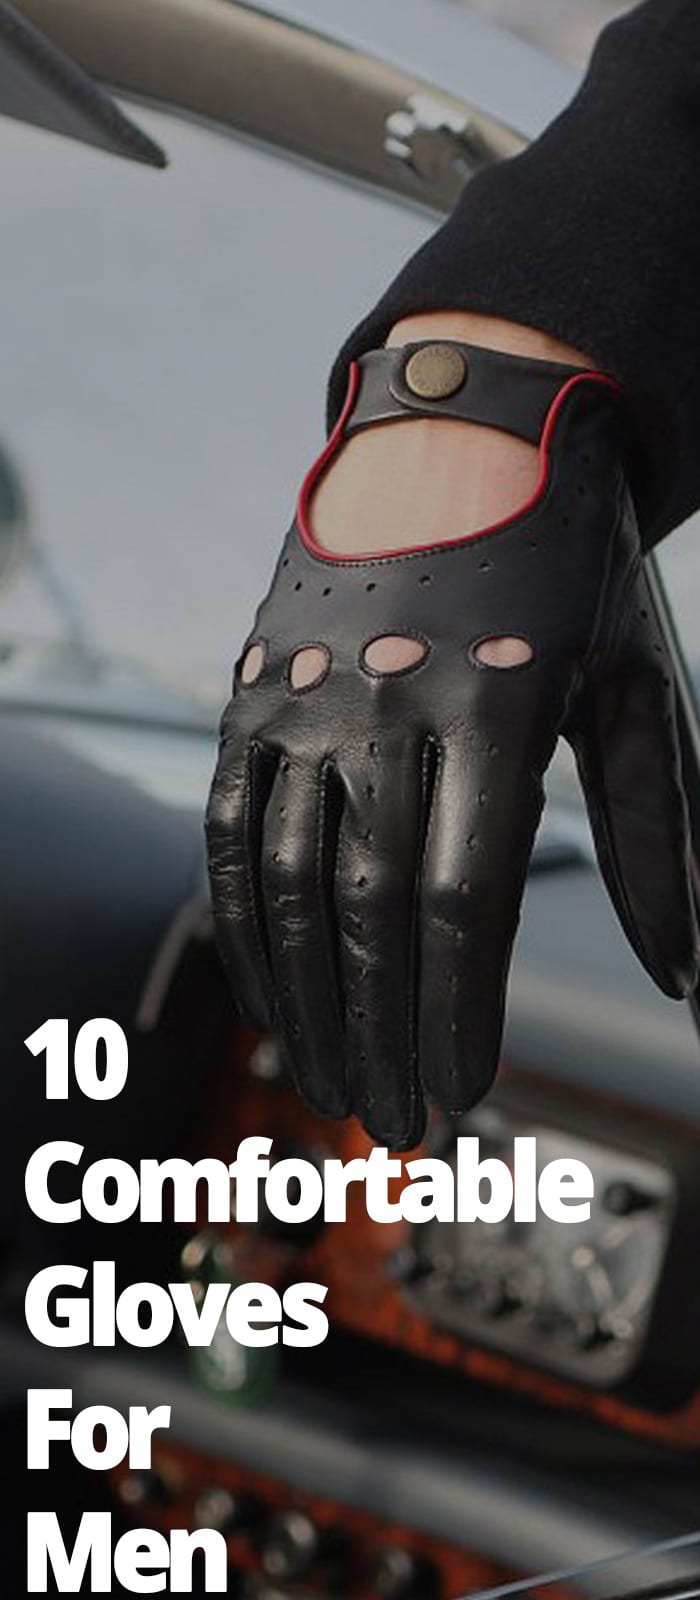 10 COMFORTABLE GLOVES